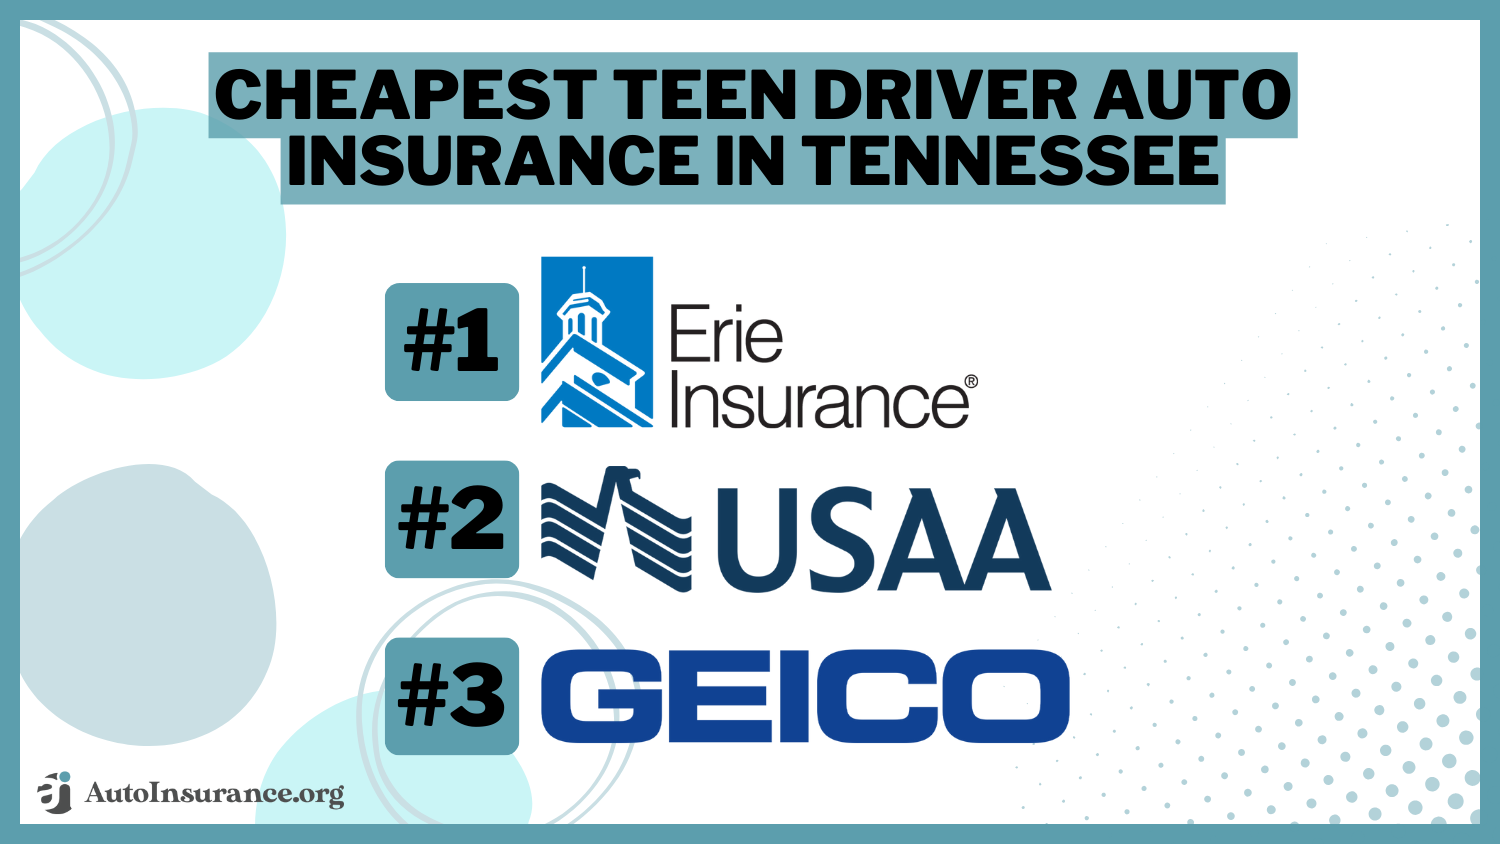 Cheapest Teen Driver Auto Insurance in Tennessee: Erie, USAA, Geico